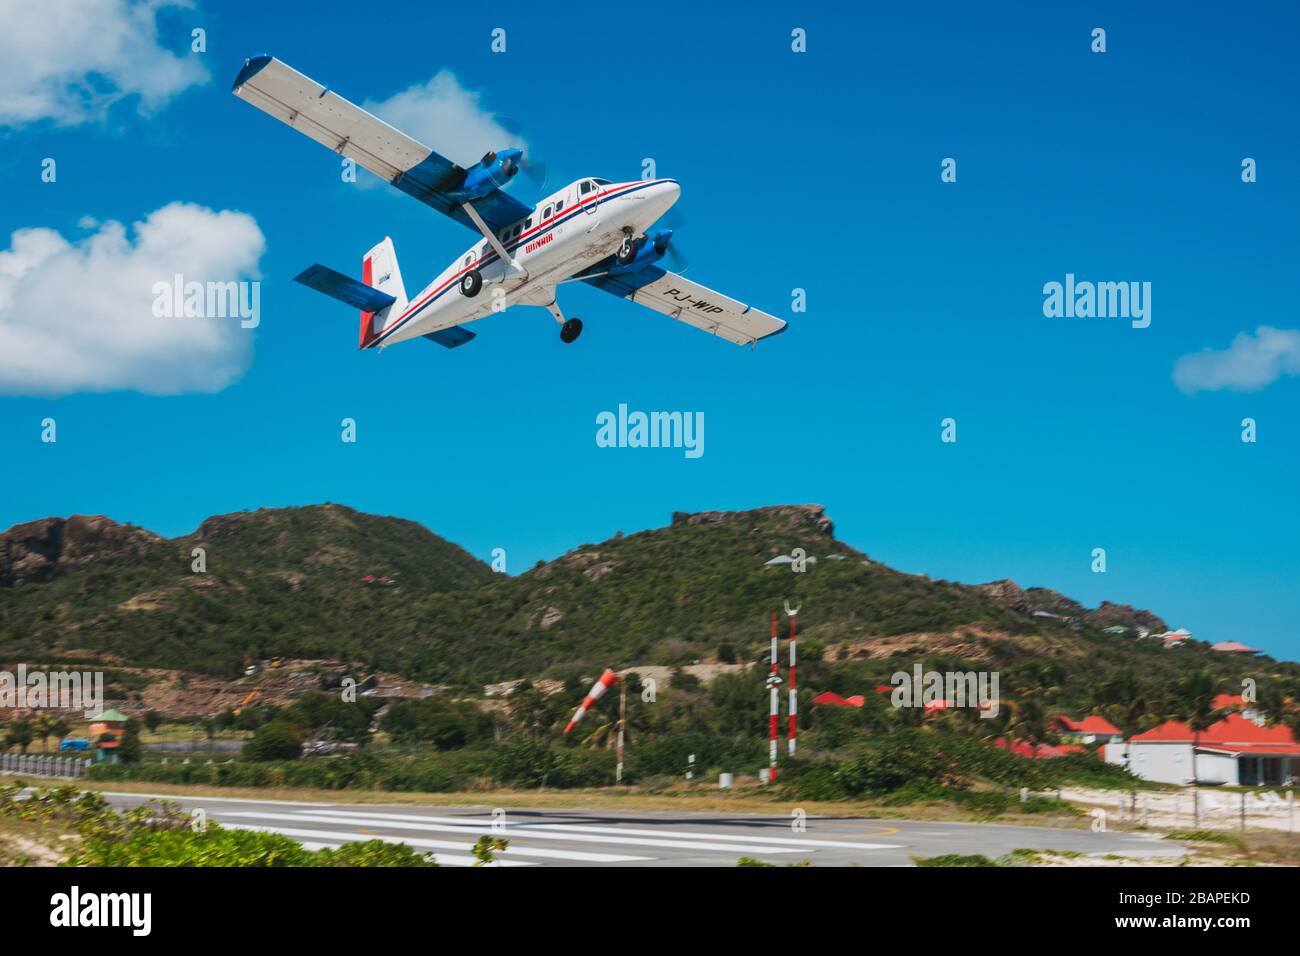 A Winair DHC6 Twin Otter departs over the beach at Saint Barthélemy Airport, French Caribbean Stock Photo